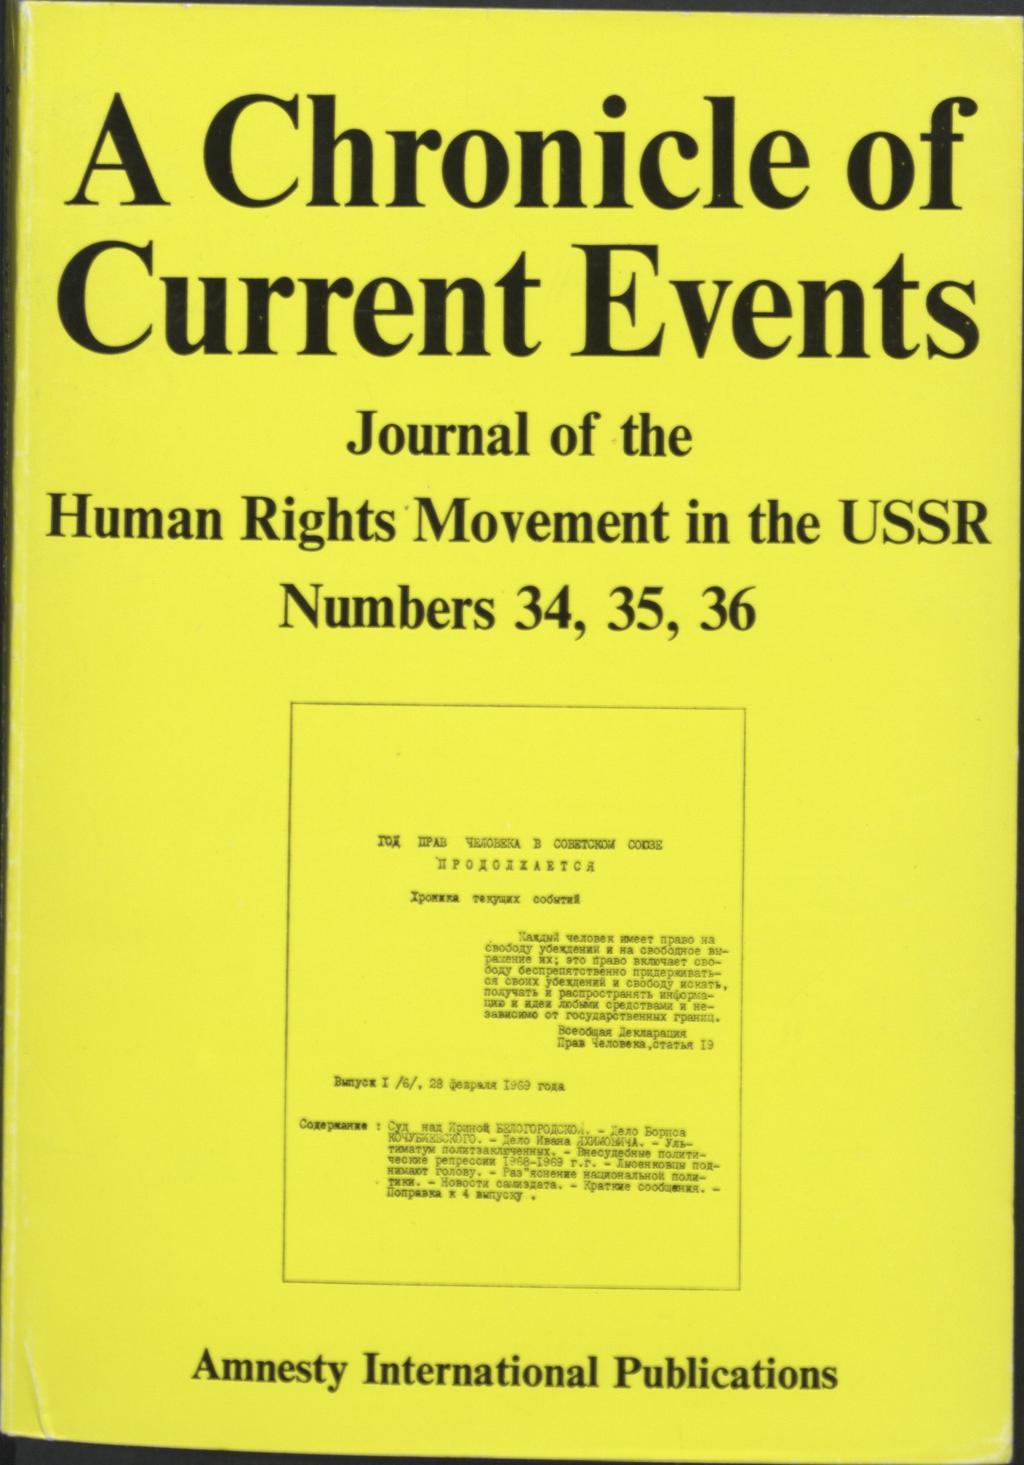 A Chronicle of Current Events Journal of the Human Rights Movement in the USSR Numbers 34, 35, 36 IL IIPATX,11:010BEKA IIPOI(OZZABSCA B COBEIM4 COME Xpaffirs miricr cocherd 0100110 weer np110